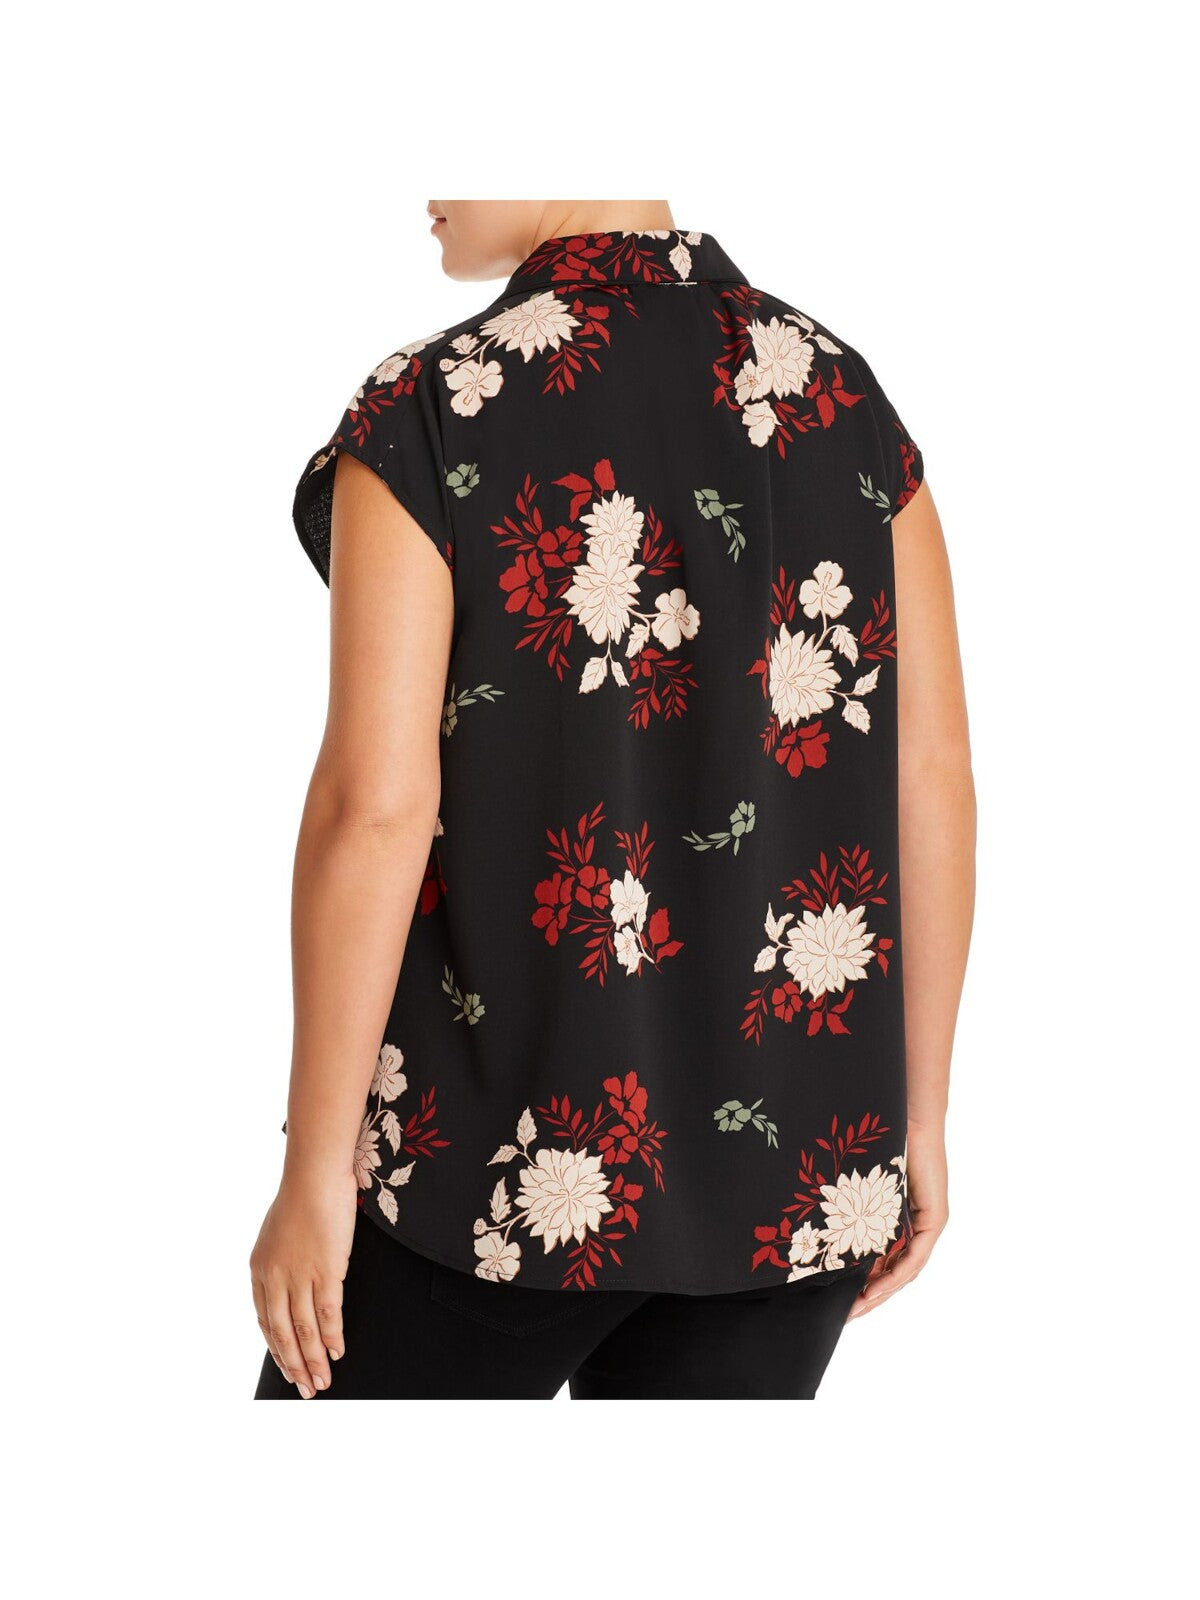 B COLLECTION Womens Black Pleated Curved Hem Floral Cap Sleeve Collared Button Up Top Plus 1X